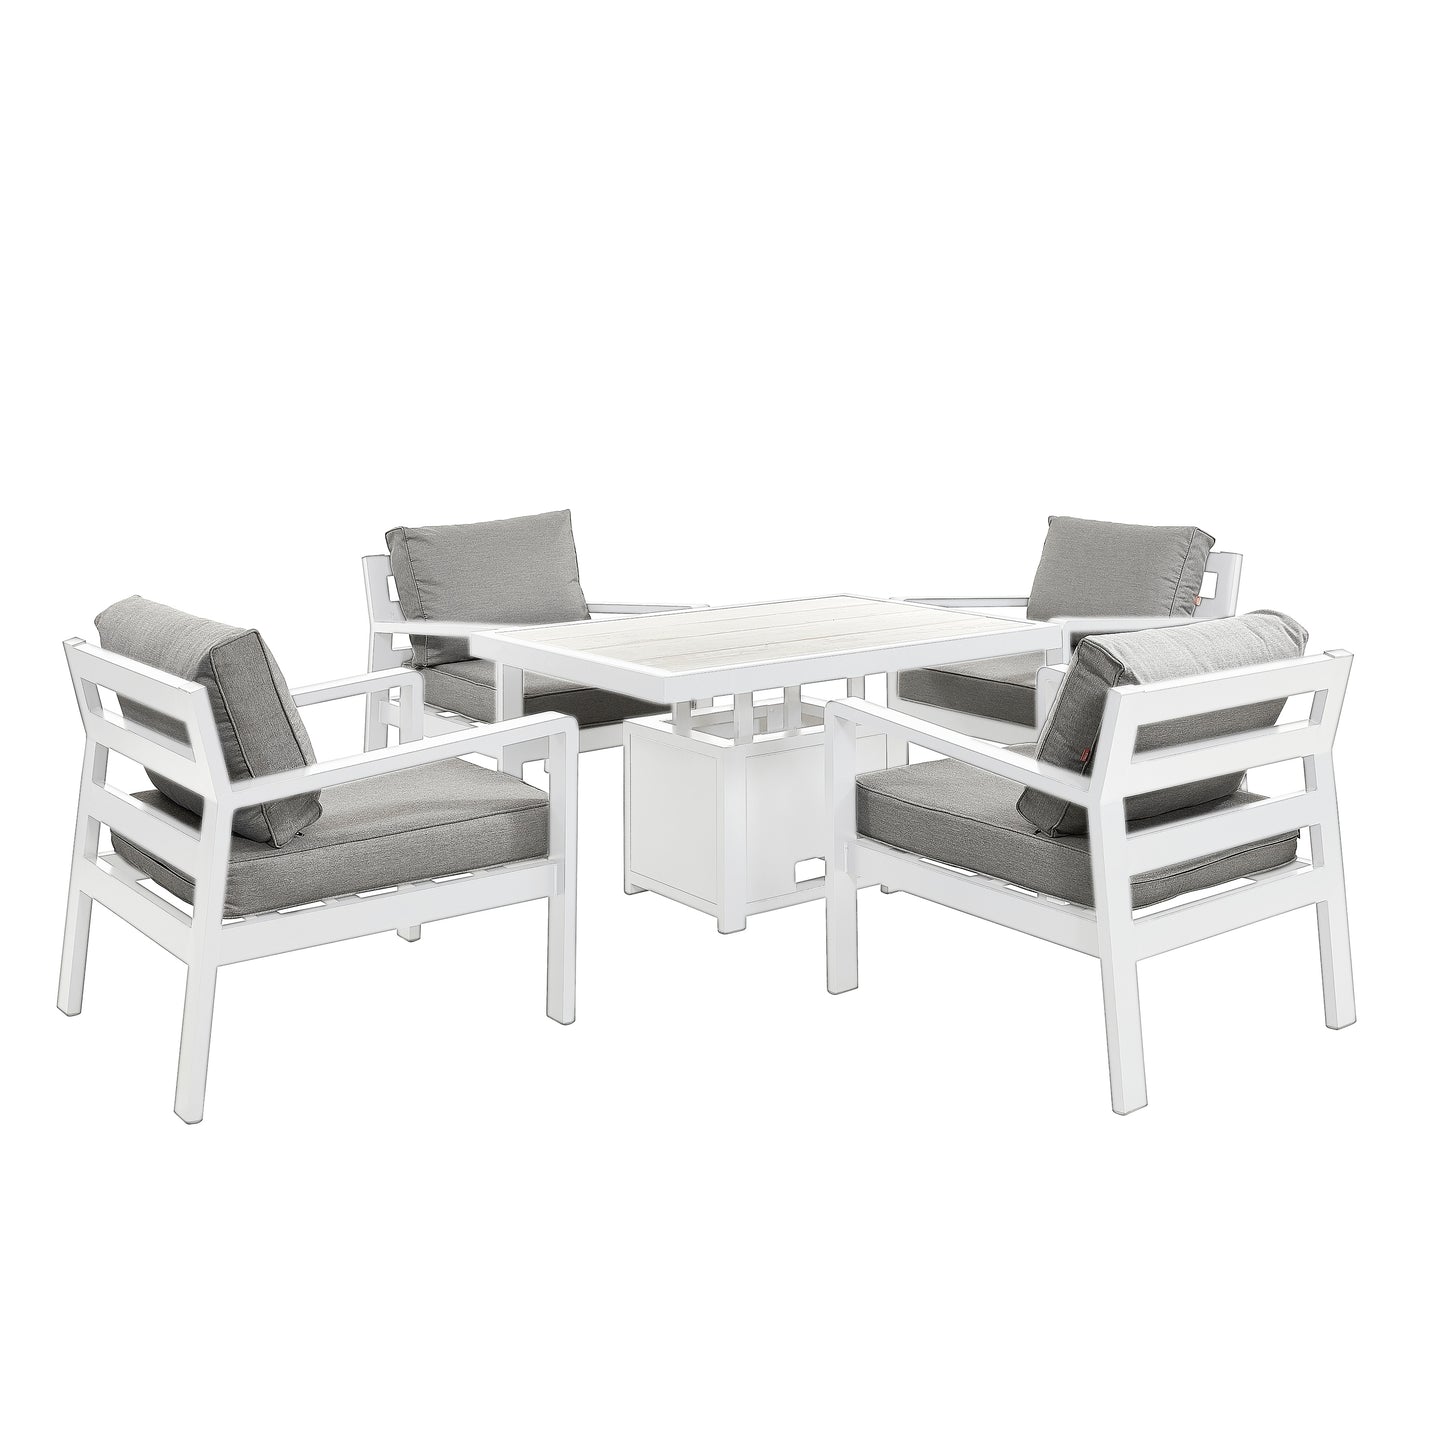 HEX Living - Tutbury Dual Height Rectangular Table with Four Chairs